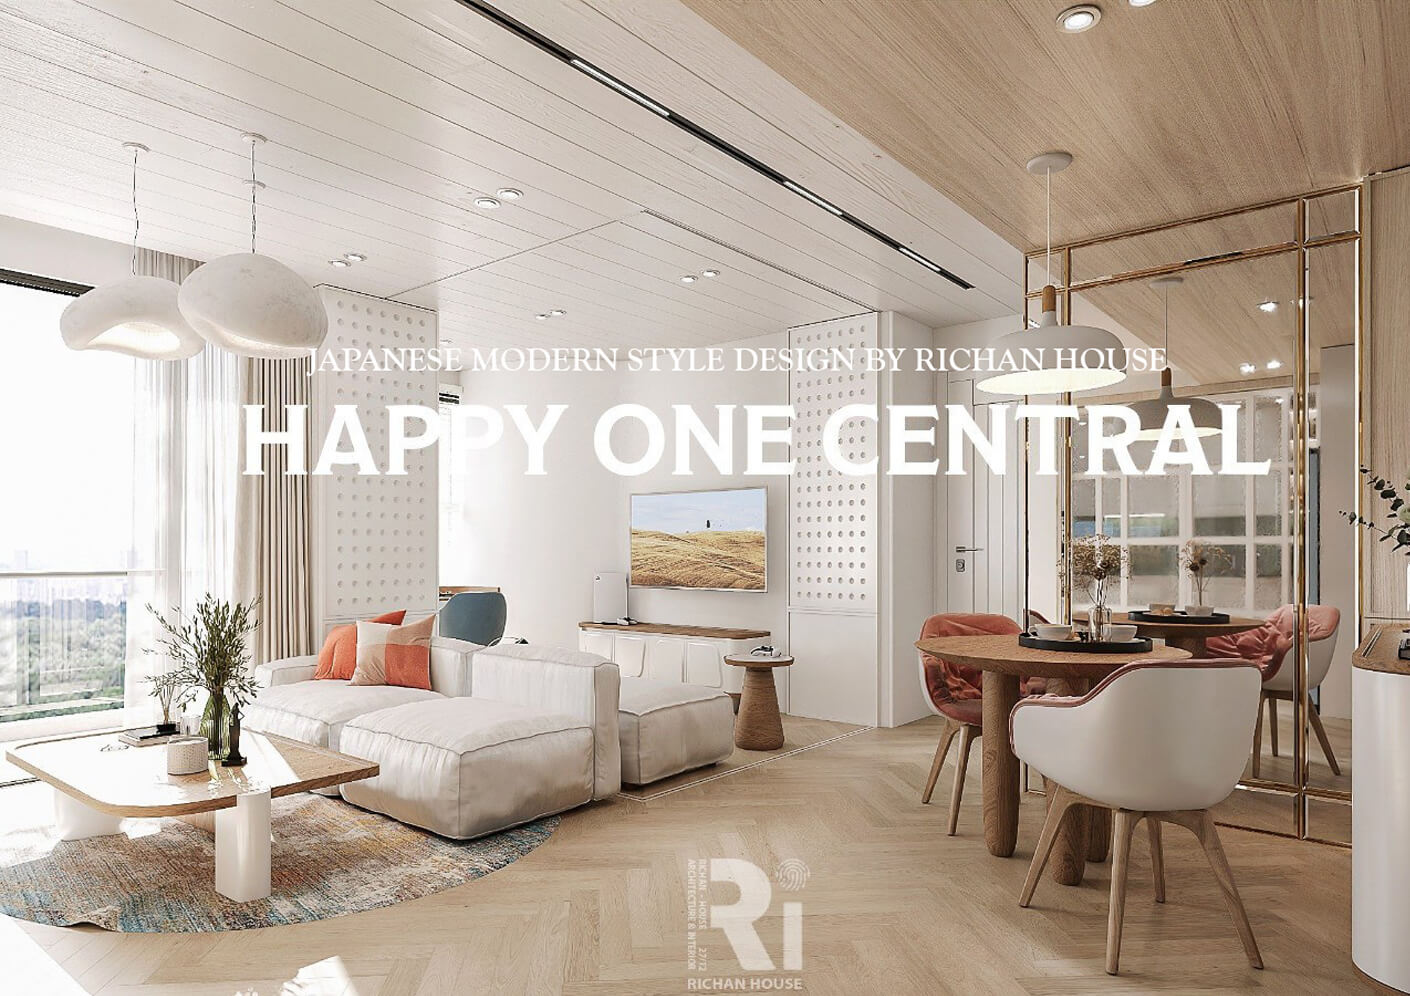 HAPPY ONE CENTRAL APARTMENT